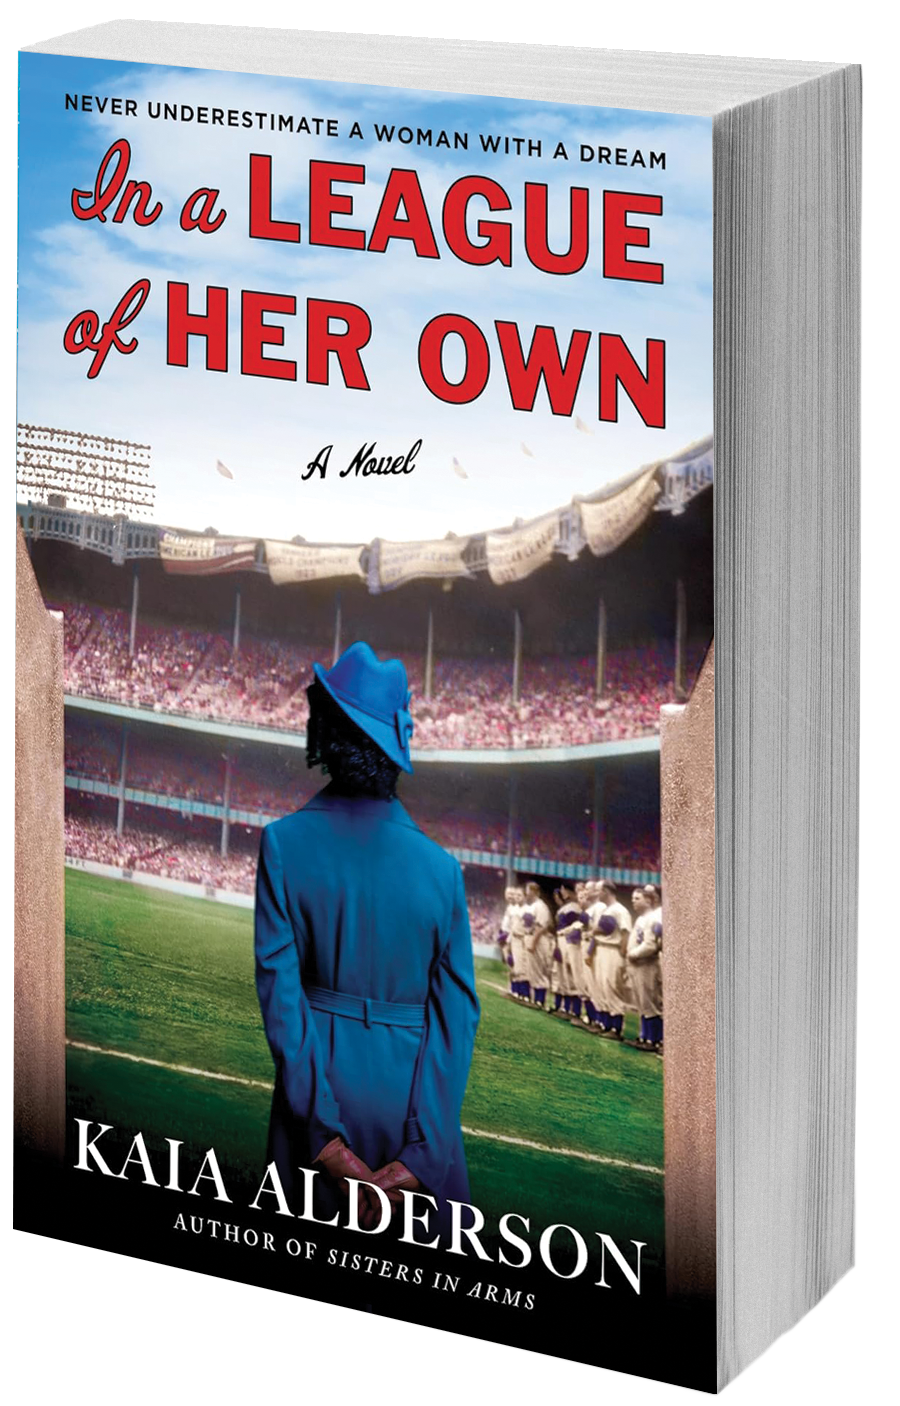 book cover woman overlooking baseball field